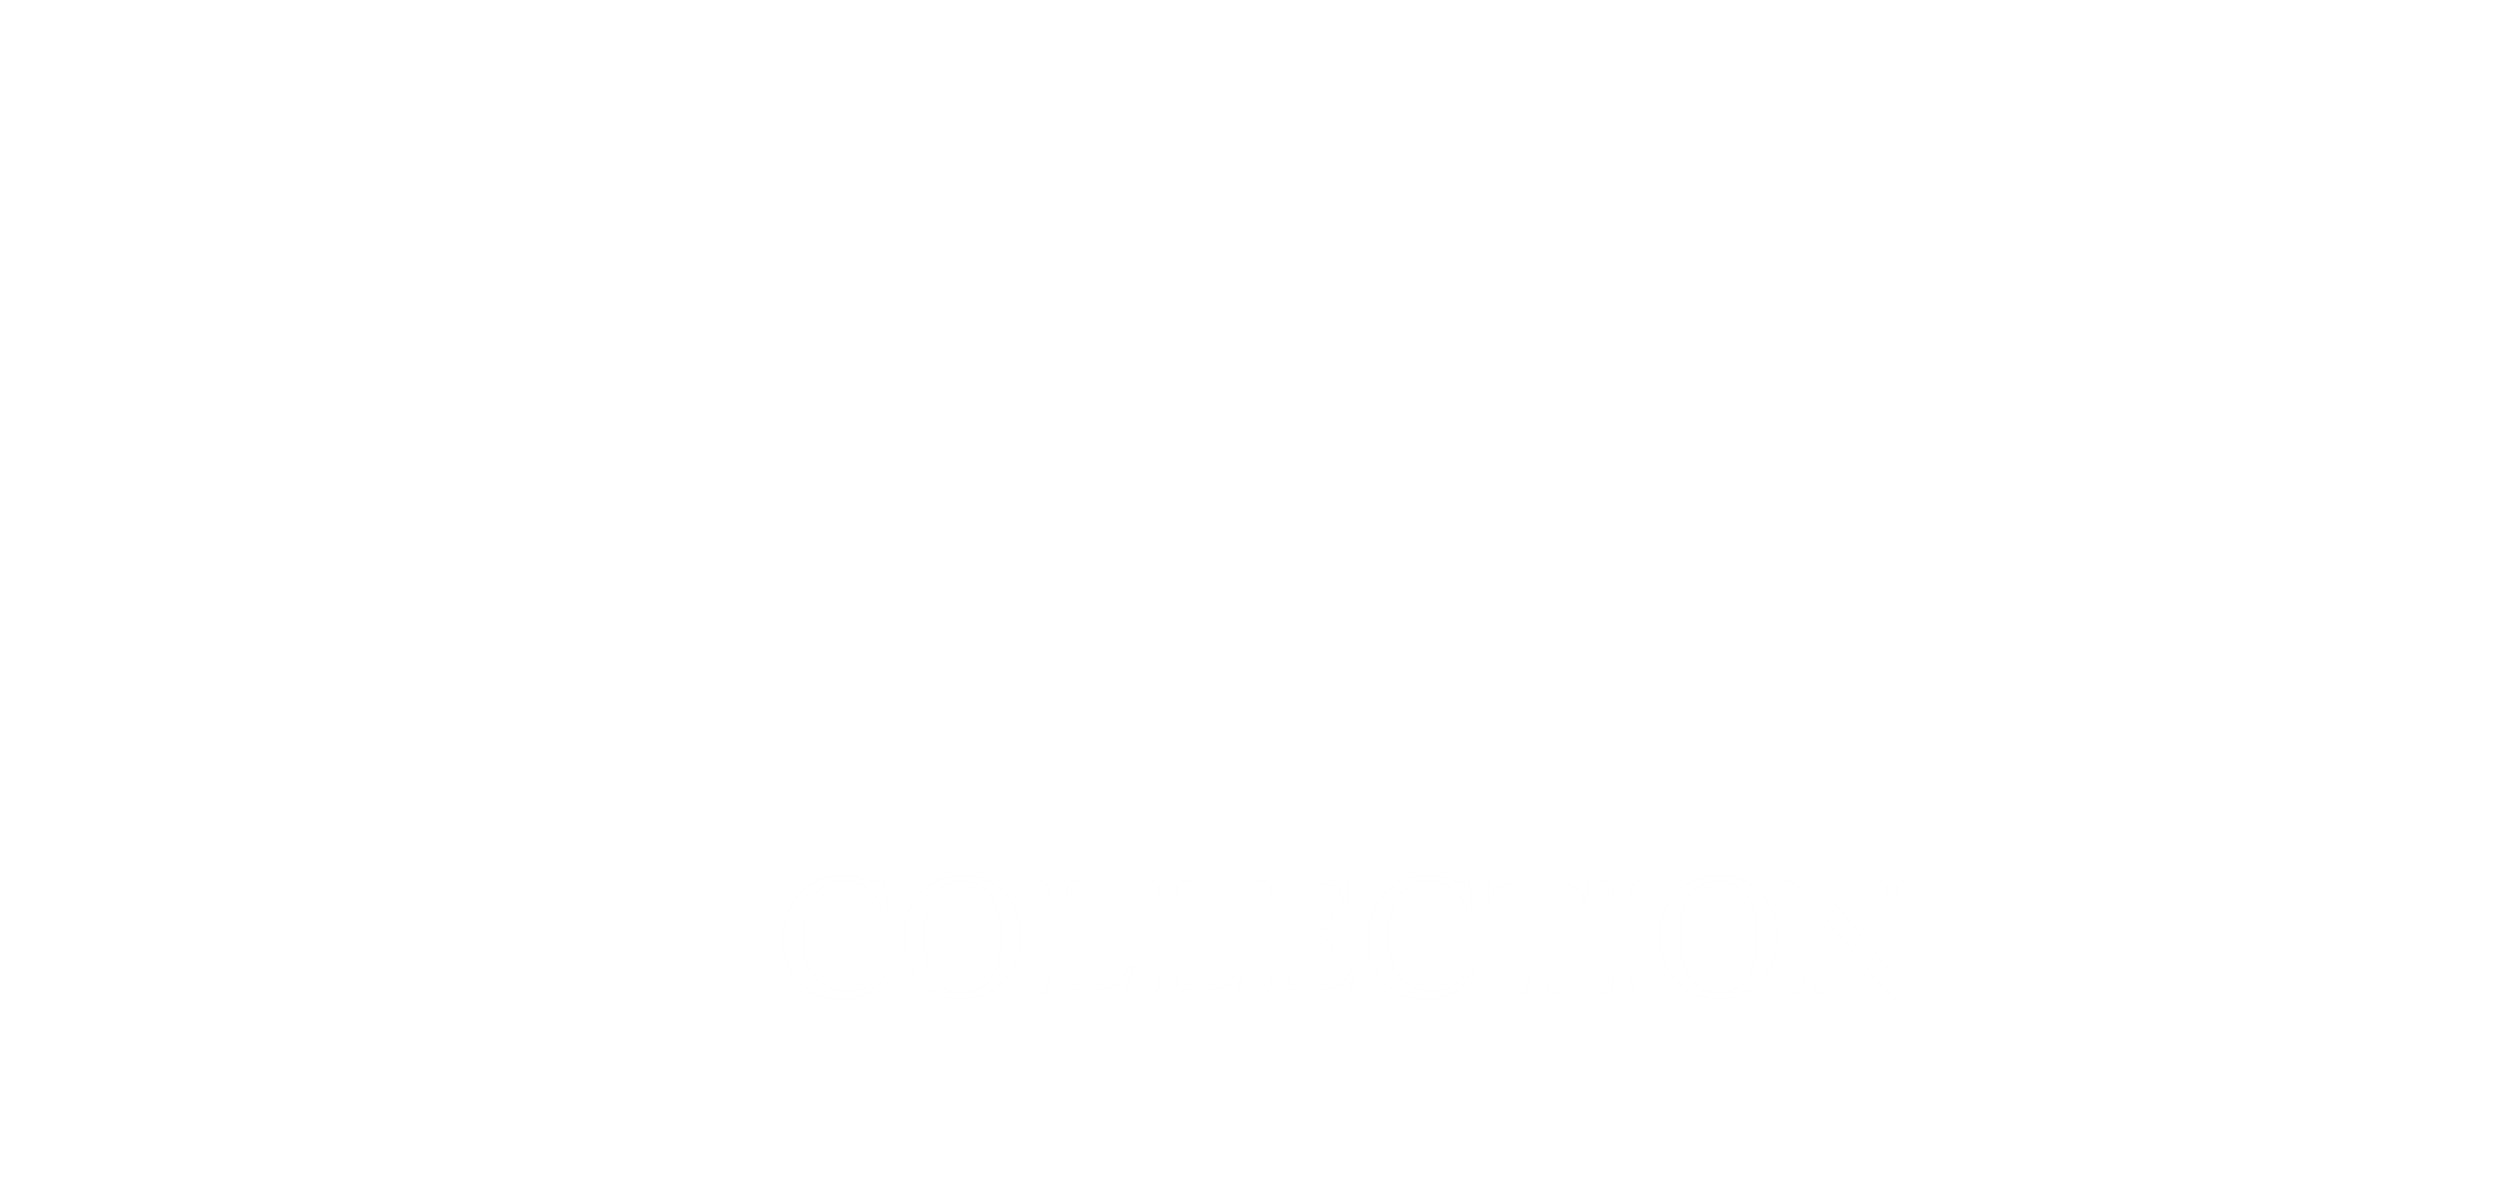 More information about "Disney Collection Playlist Theme Video"